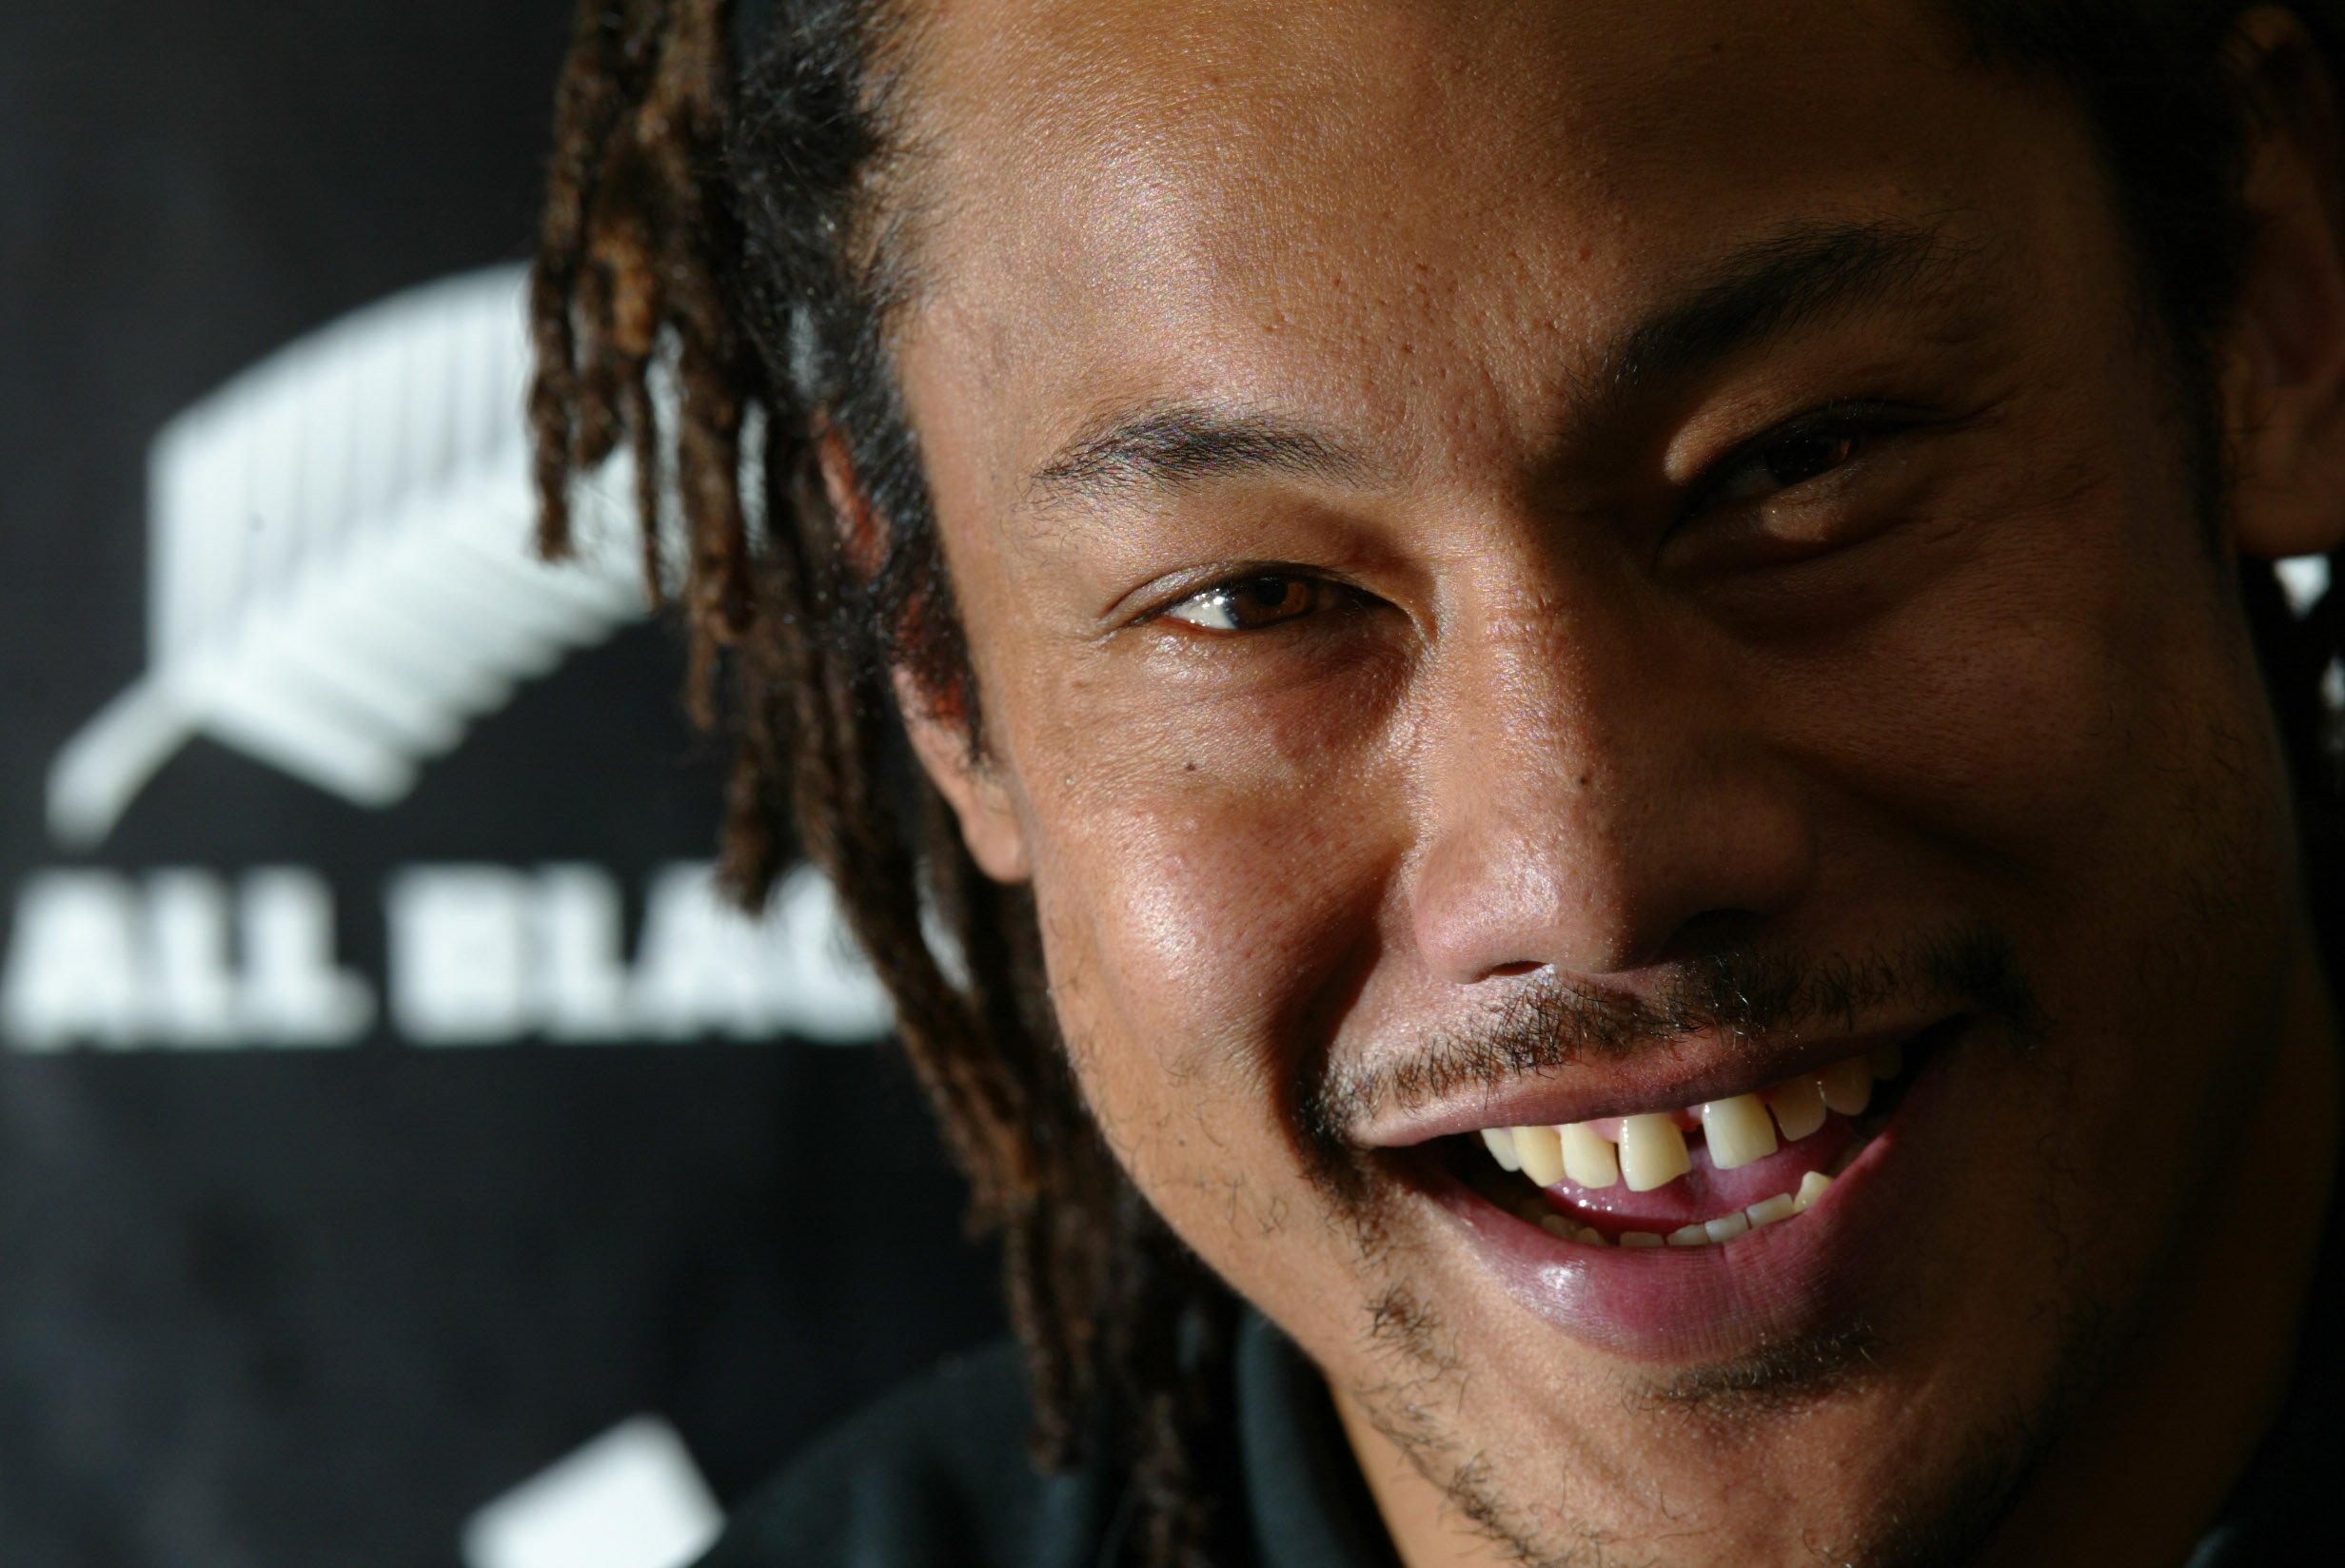 Tana Umaga is hoping to coach BGC Asia-Pacific Dragons to another title at the GFI HKFC Tens. Photo: Reuters